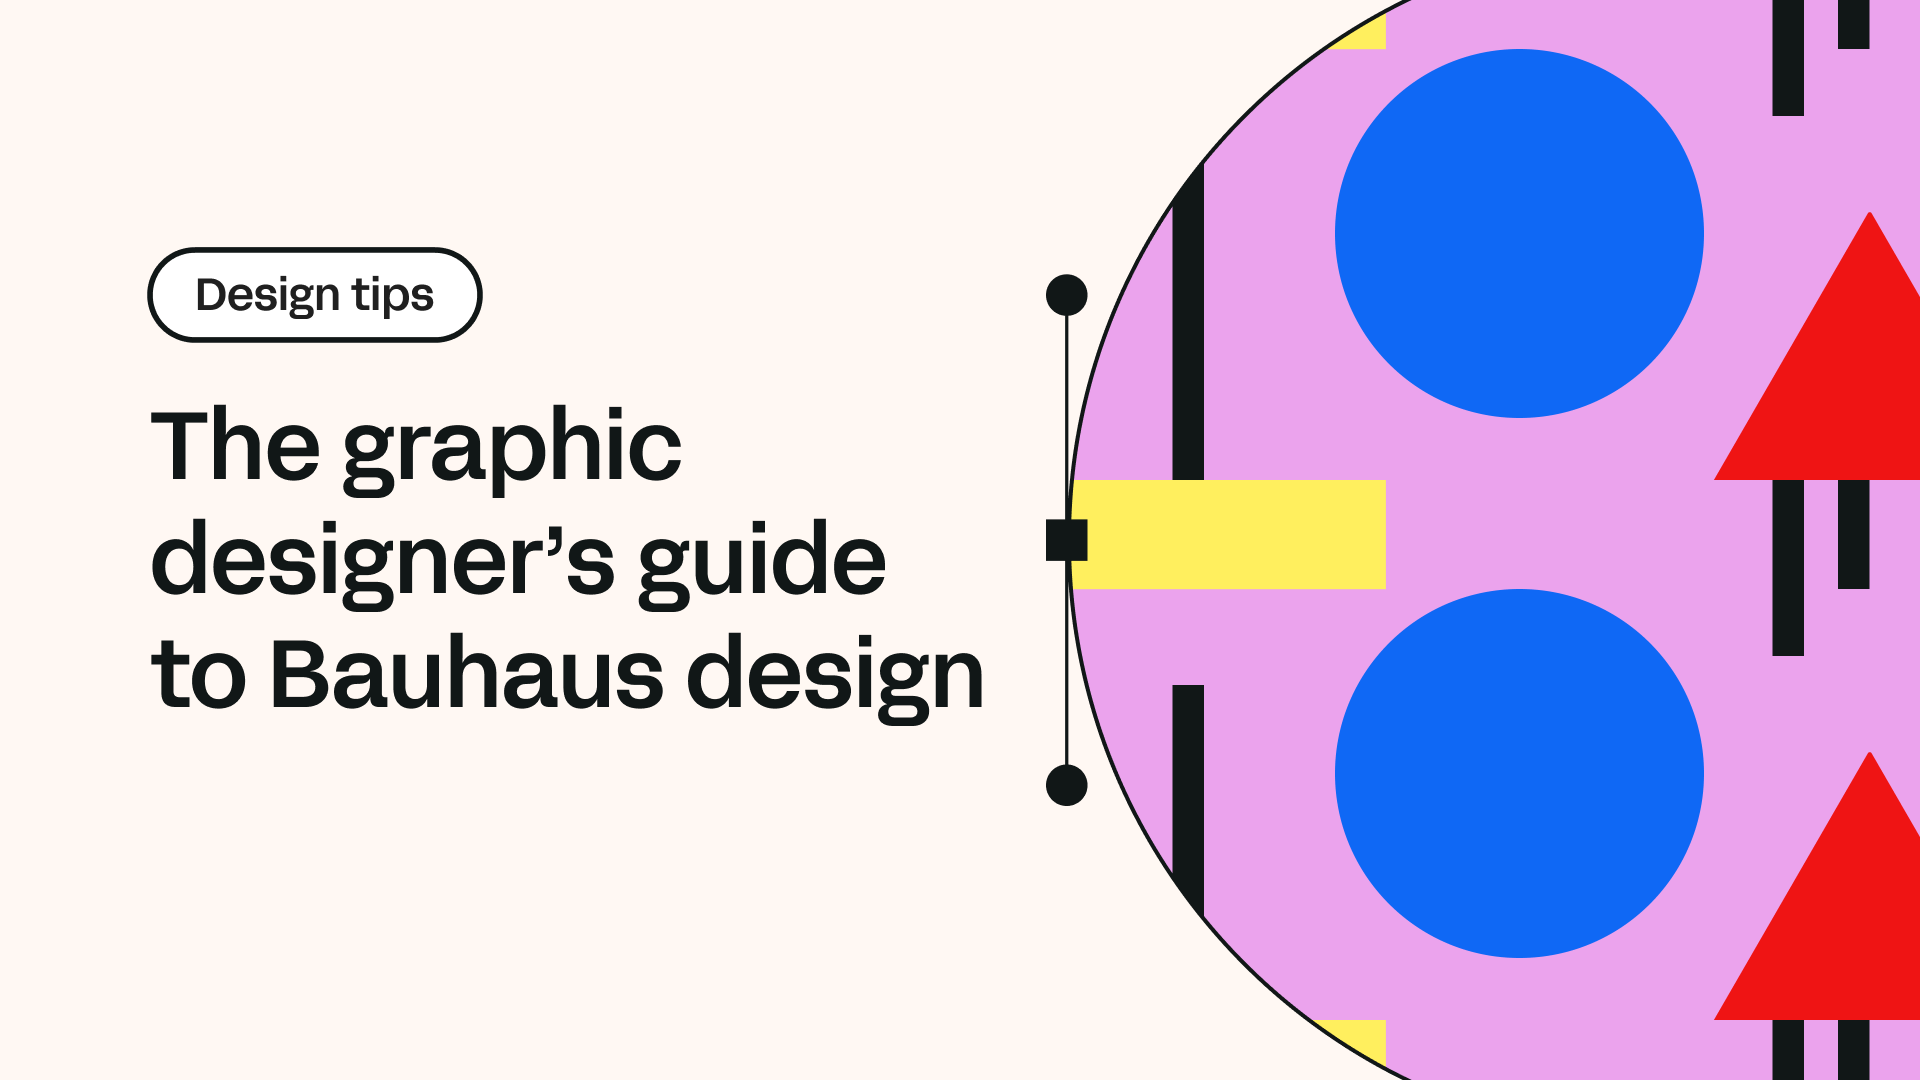 The graphic designer’s guide to Bauhaus design + Linearity